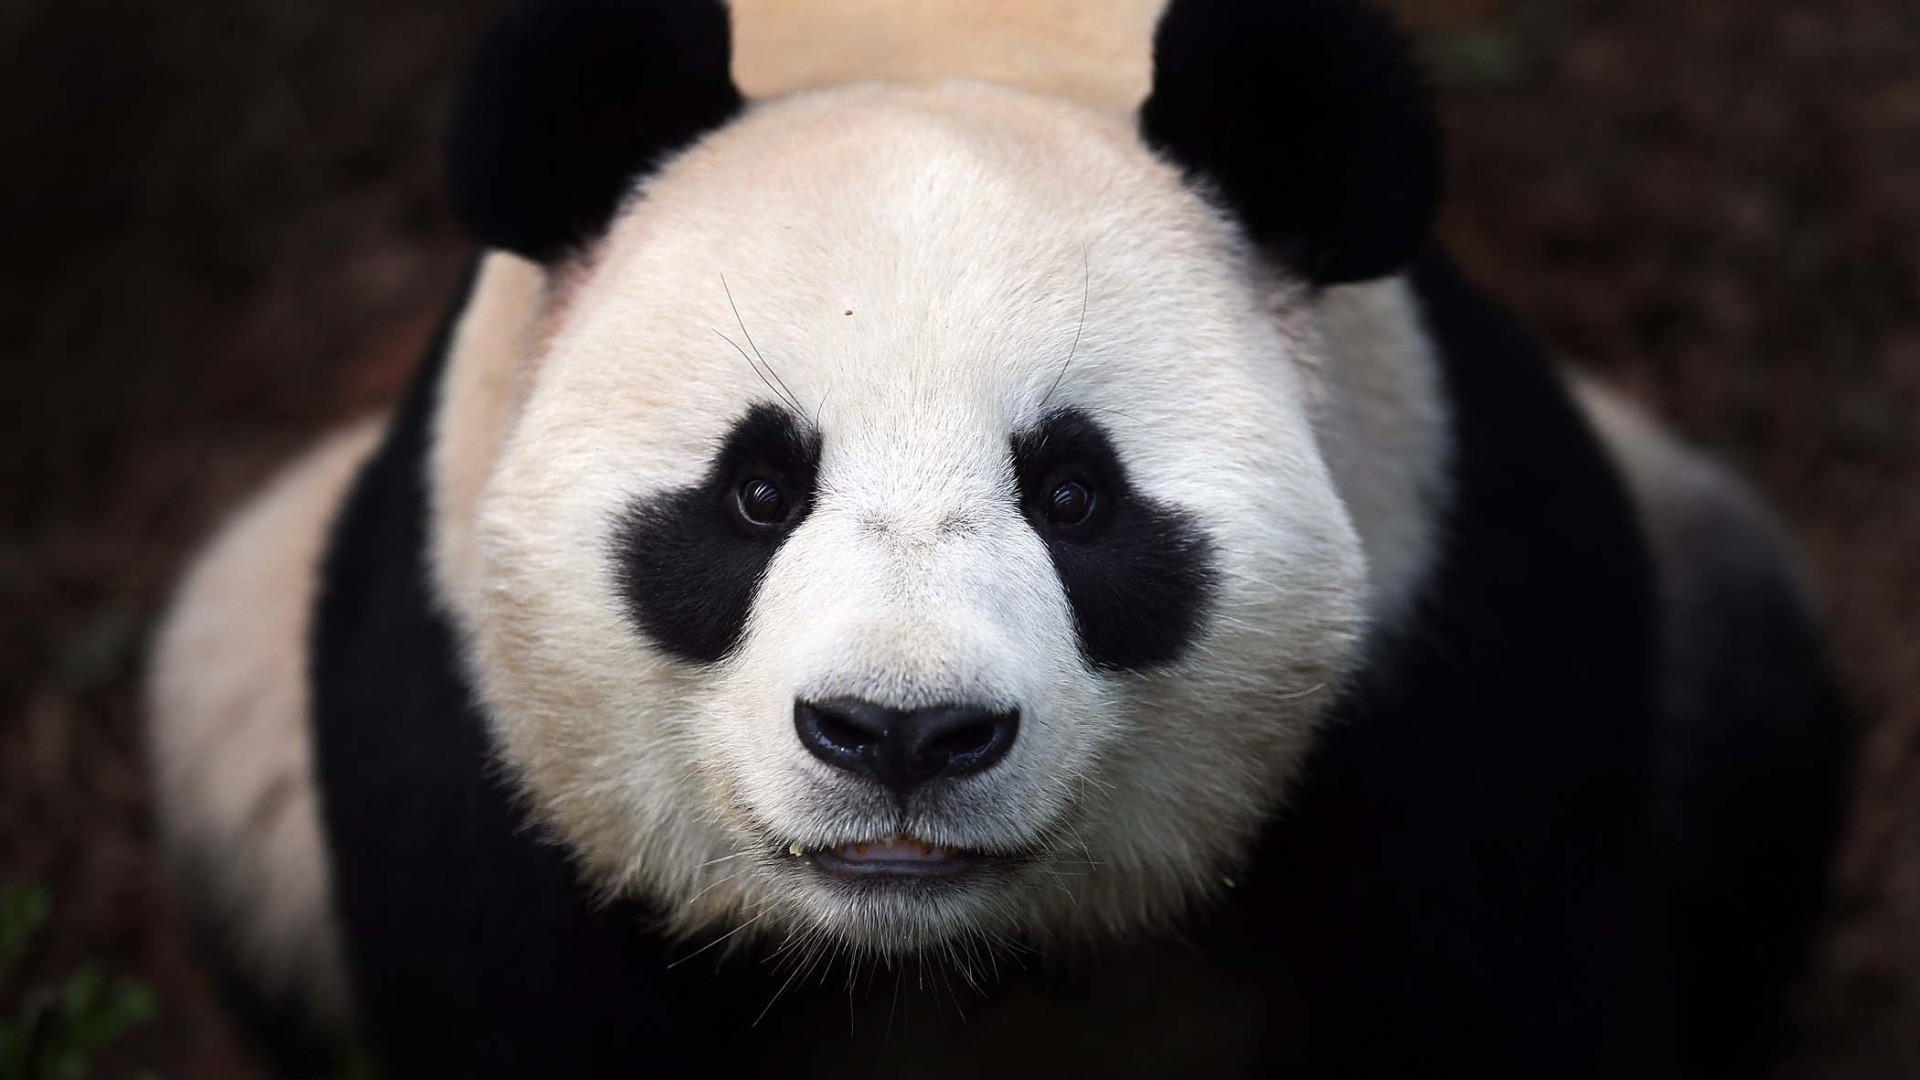 1920x1080 The 20 best images about Panda on Pinterest | How to draw, Panda drawing  and Wallpaper pictures